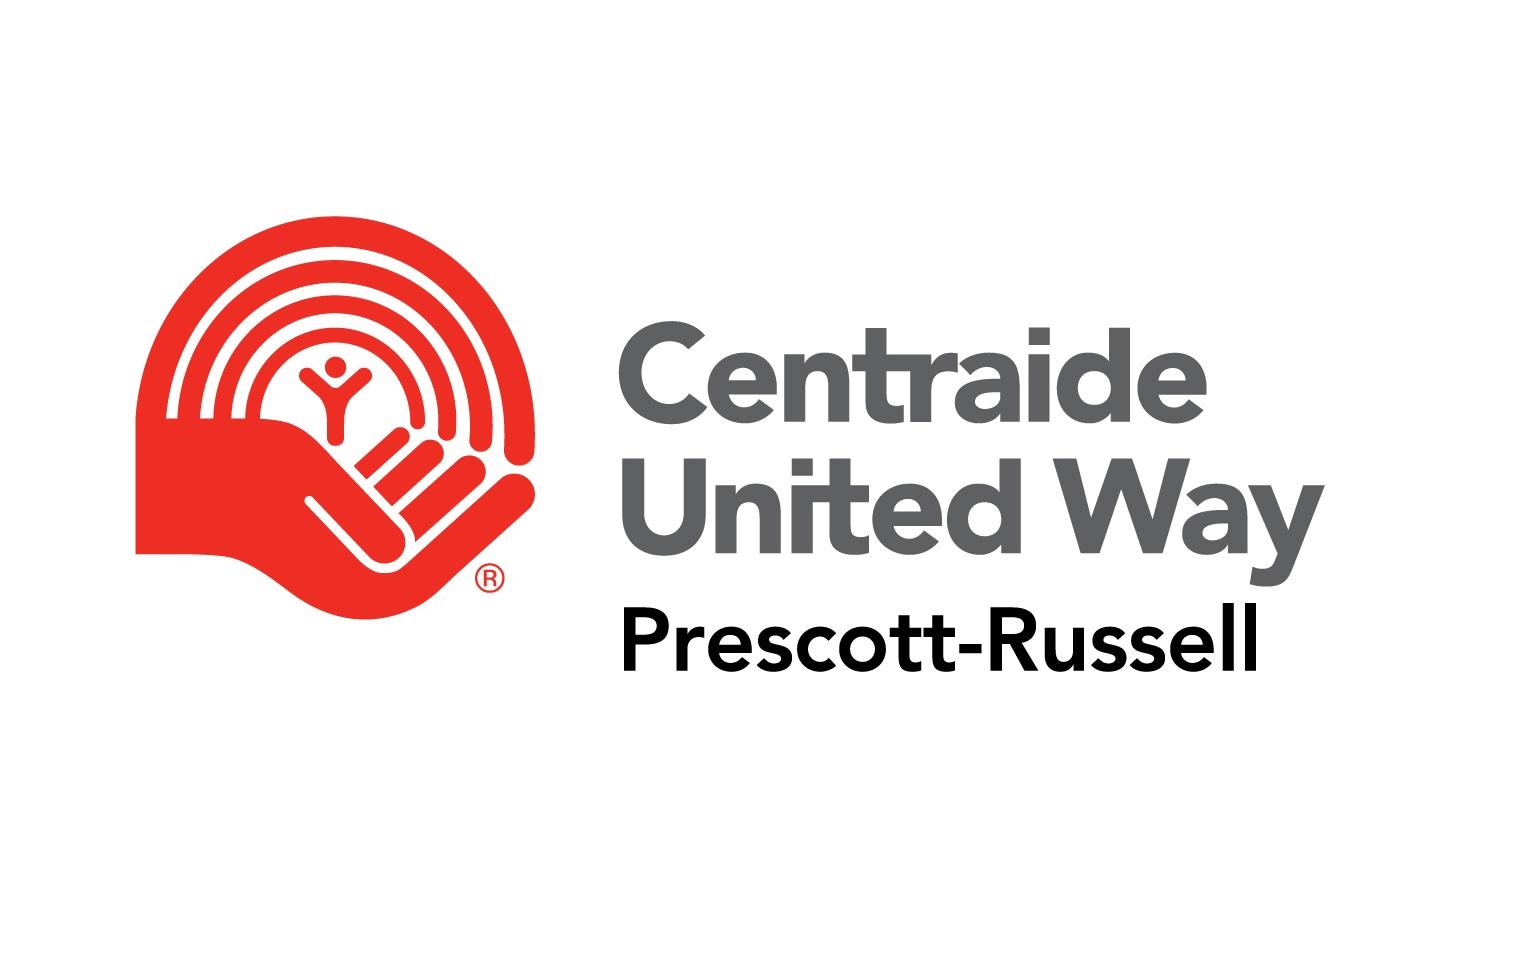 Does your Prescott-Russell organization need help from the United Way?